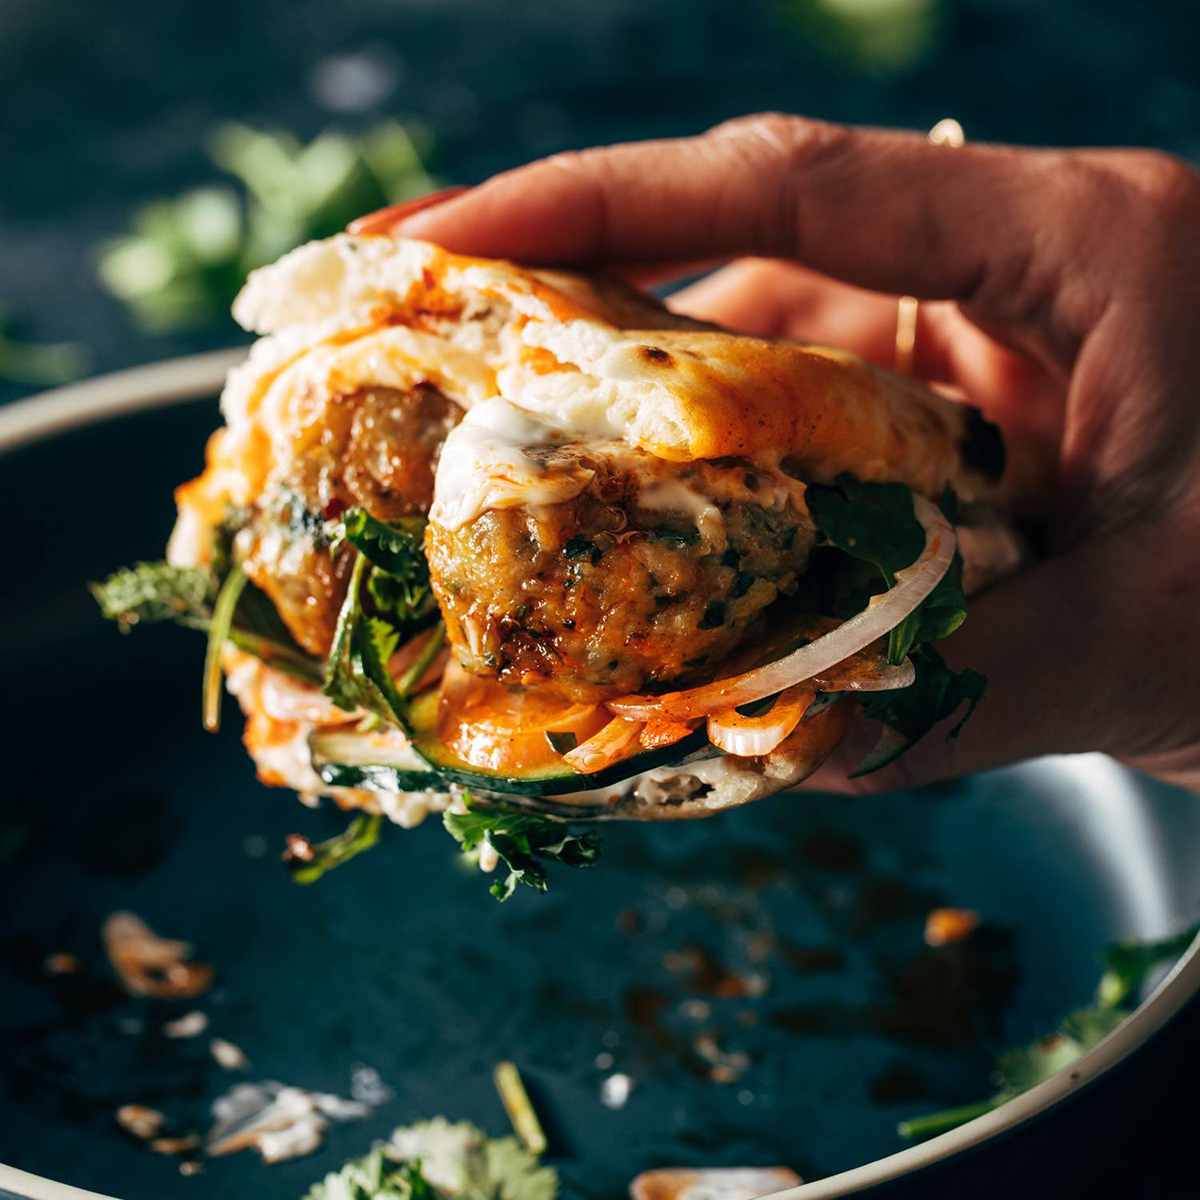 Ginger chicken meatball sandwich being held by a hand.